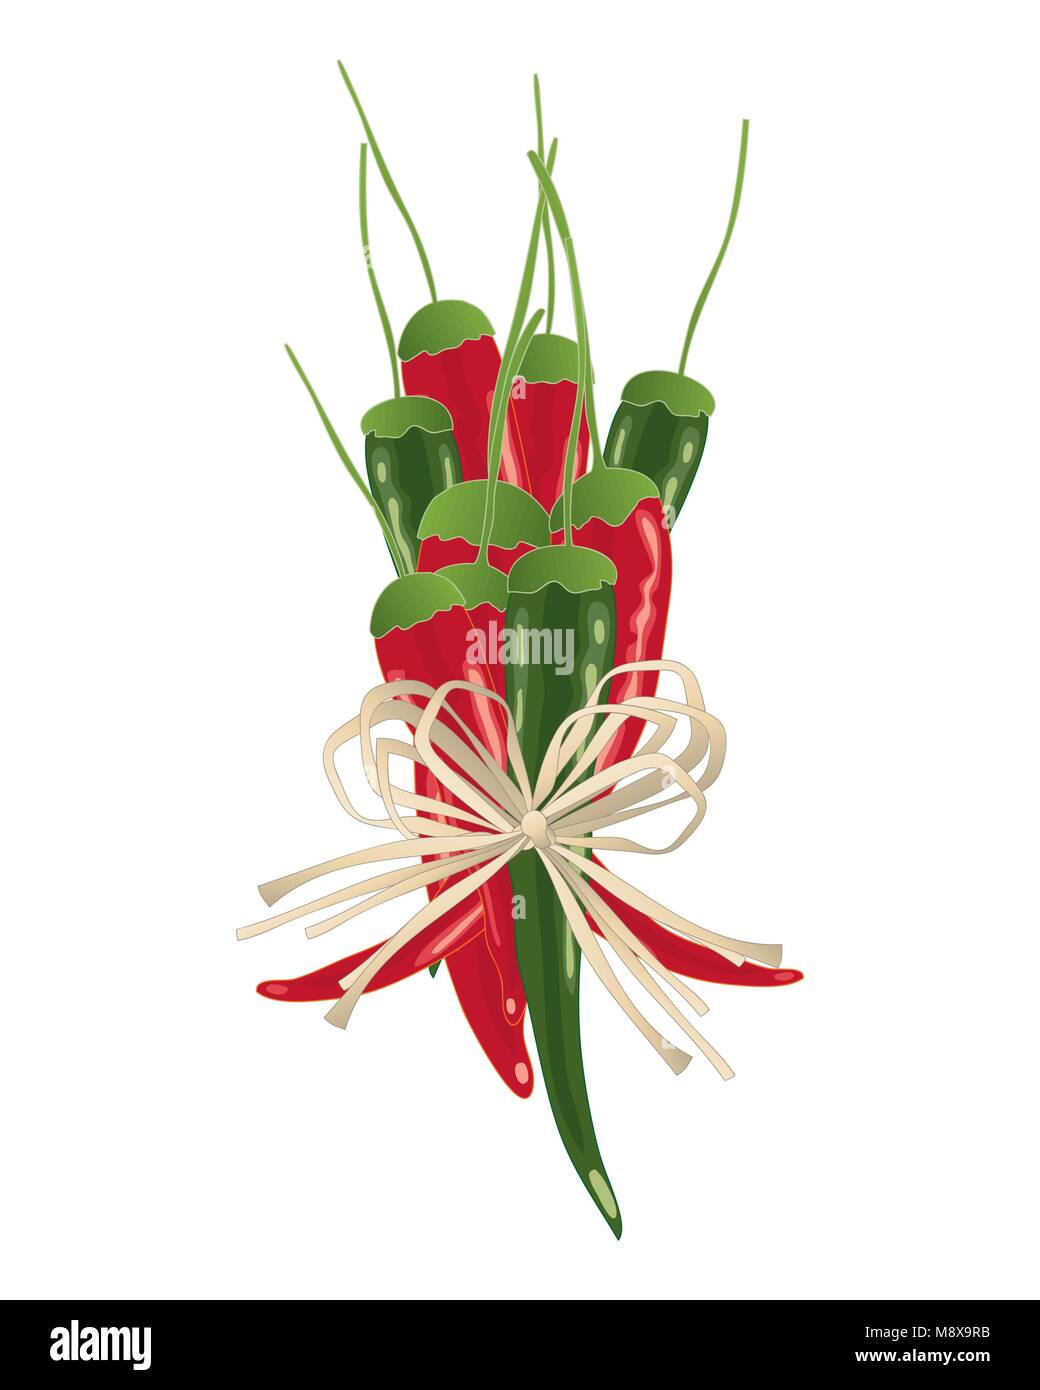 a vector illustration in eps 10 format of a rustic bundle of red and green chilli peppers with string bow on a white background Stock Vector